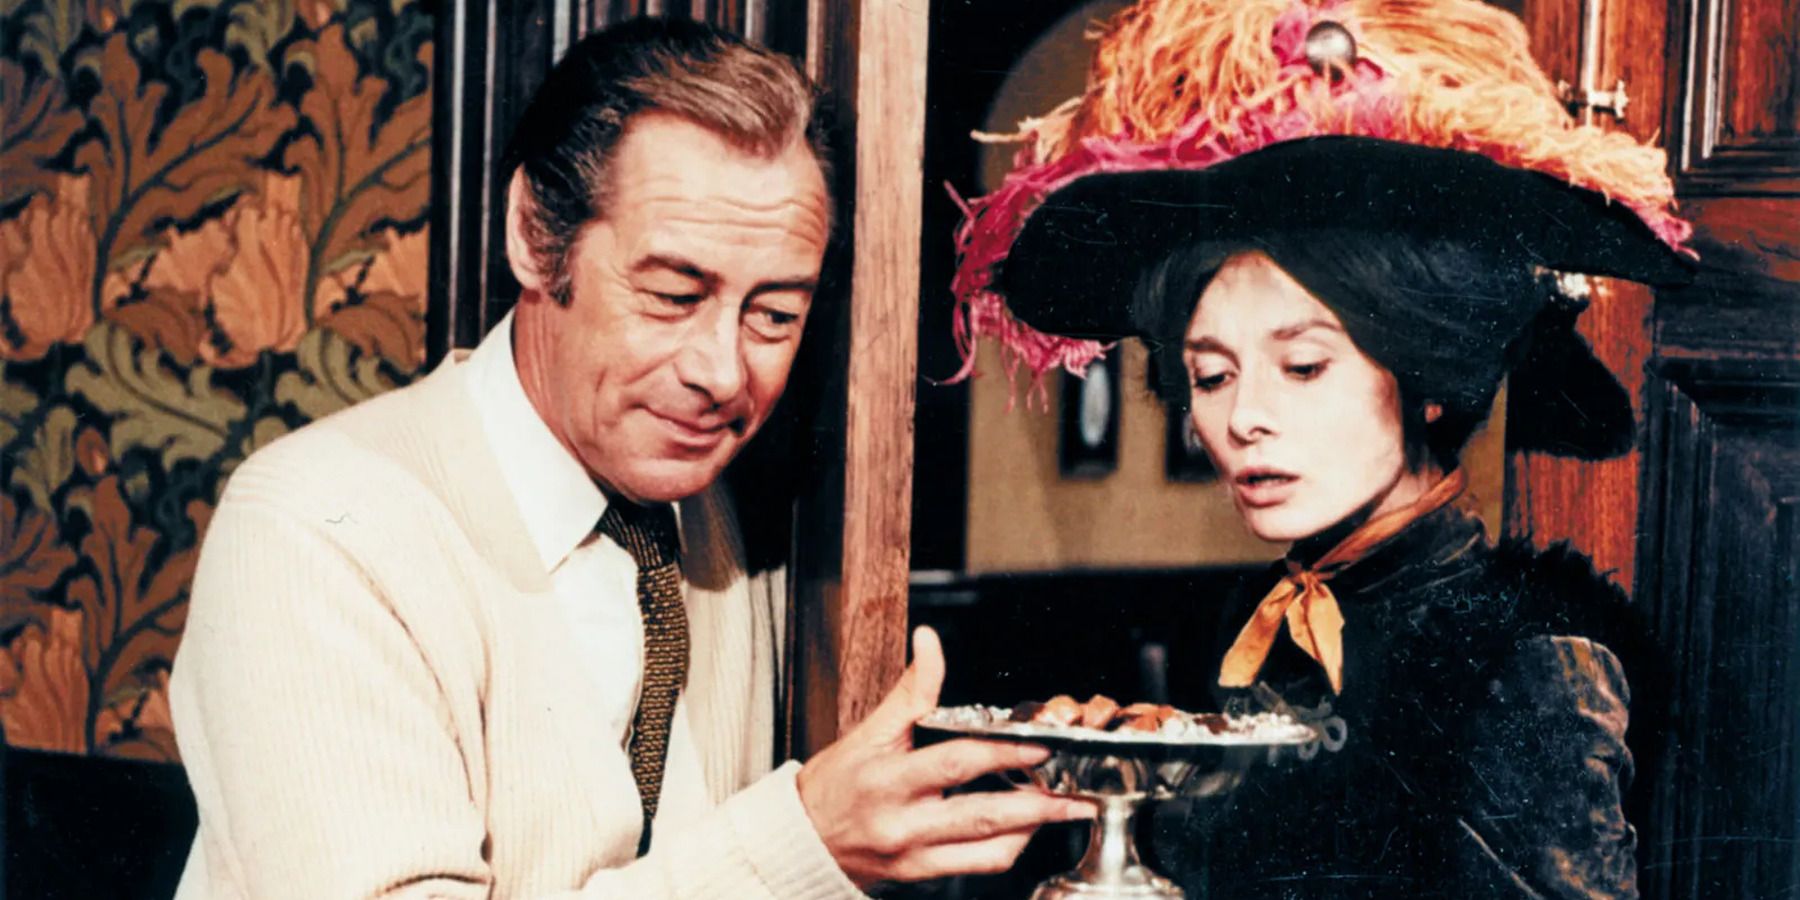 a man in a suit offering a woman with a big hat a tray with food